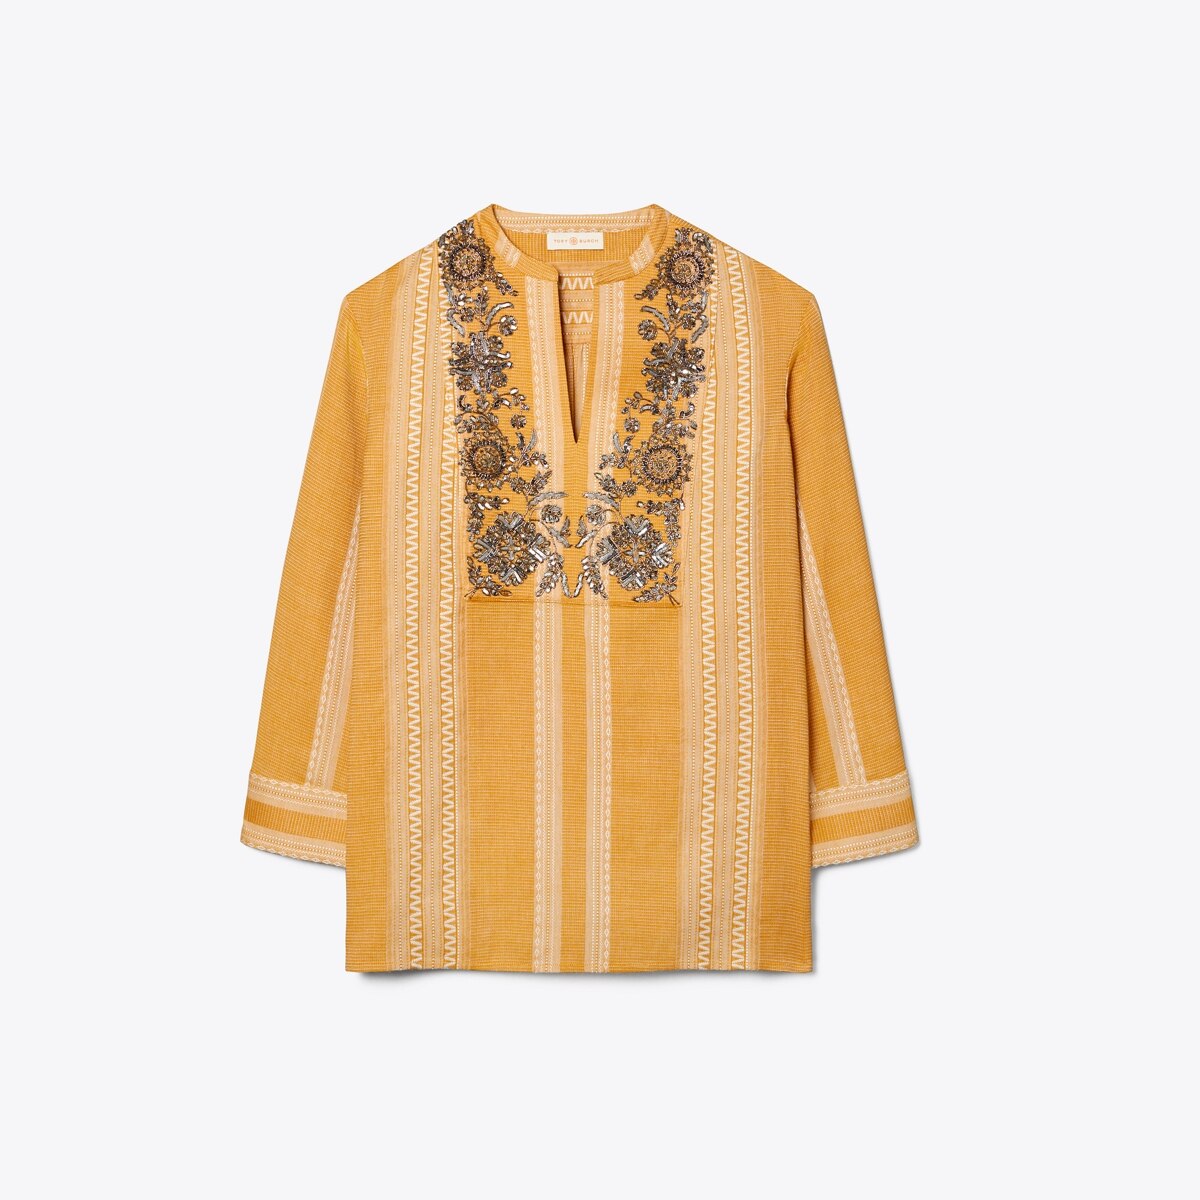 Sequined Embellished Tunic: Women's Designer Tops | Tory Burch